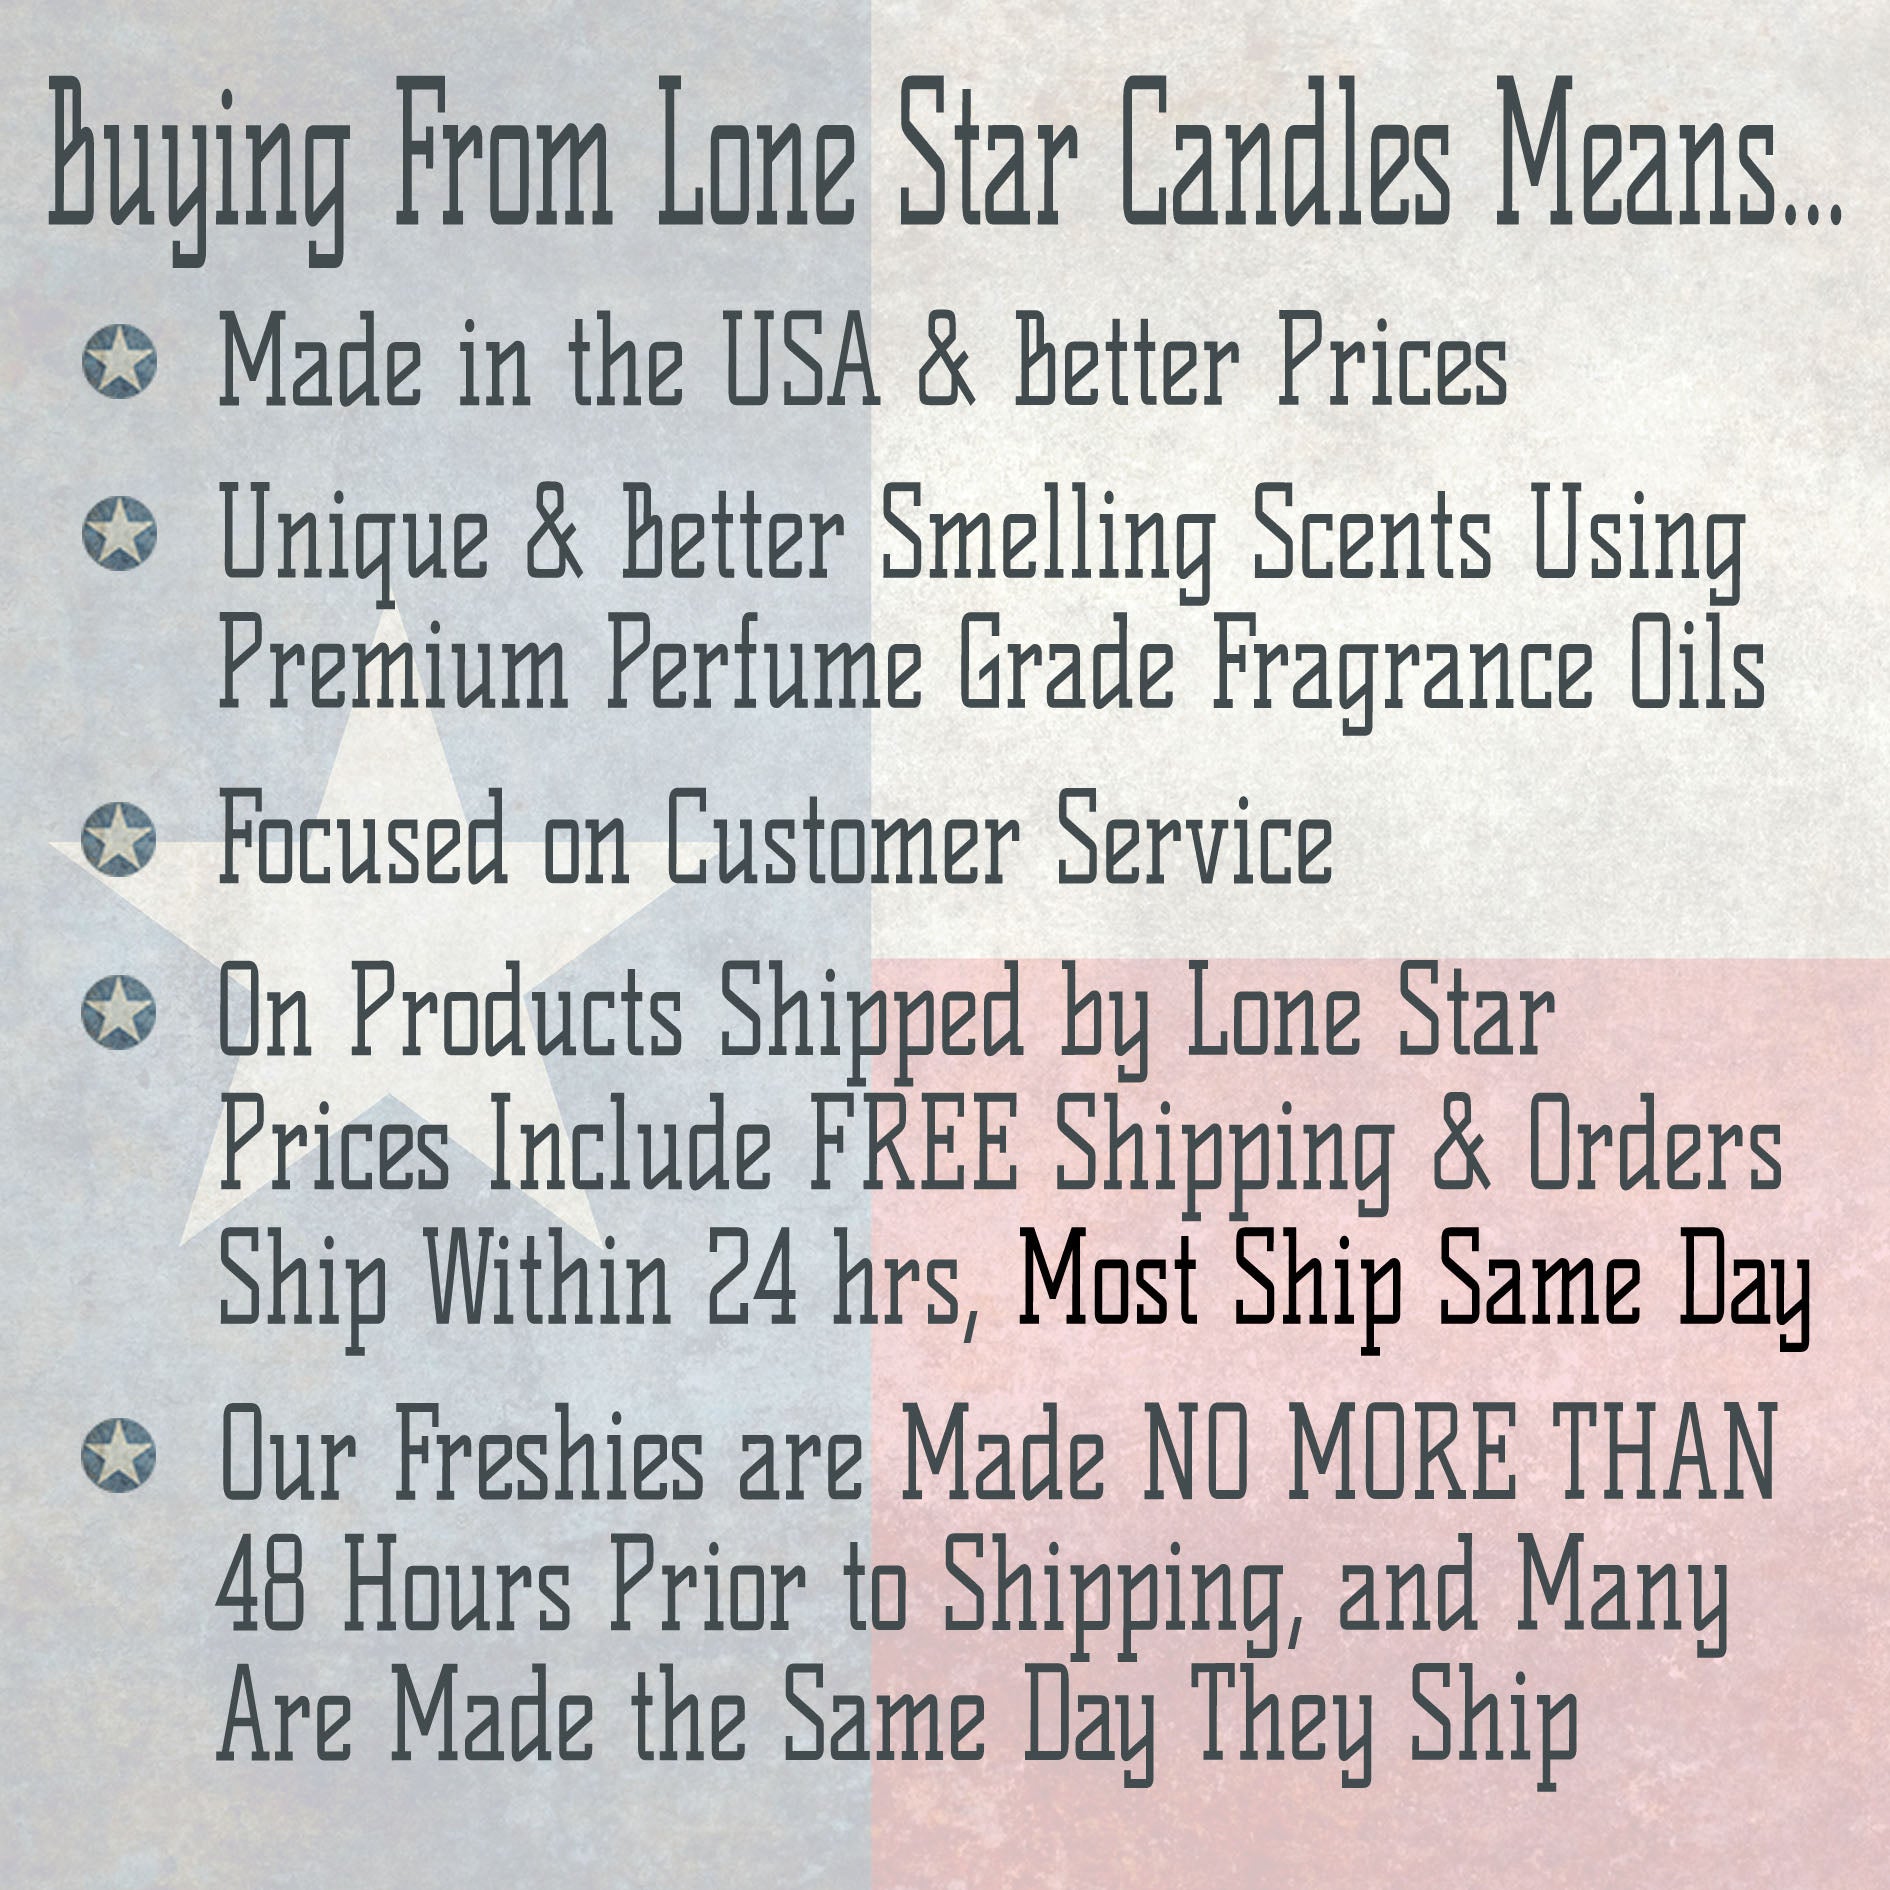 Cranberries & Sandalwood, Lone Star Candles & More's Premium Strongly Scented Freshies, A Delightful Mix of Spiced Cranberry, & Sandalwood, Car & Air Freshener, USA Made in Texas, High Heel 1-Pack